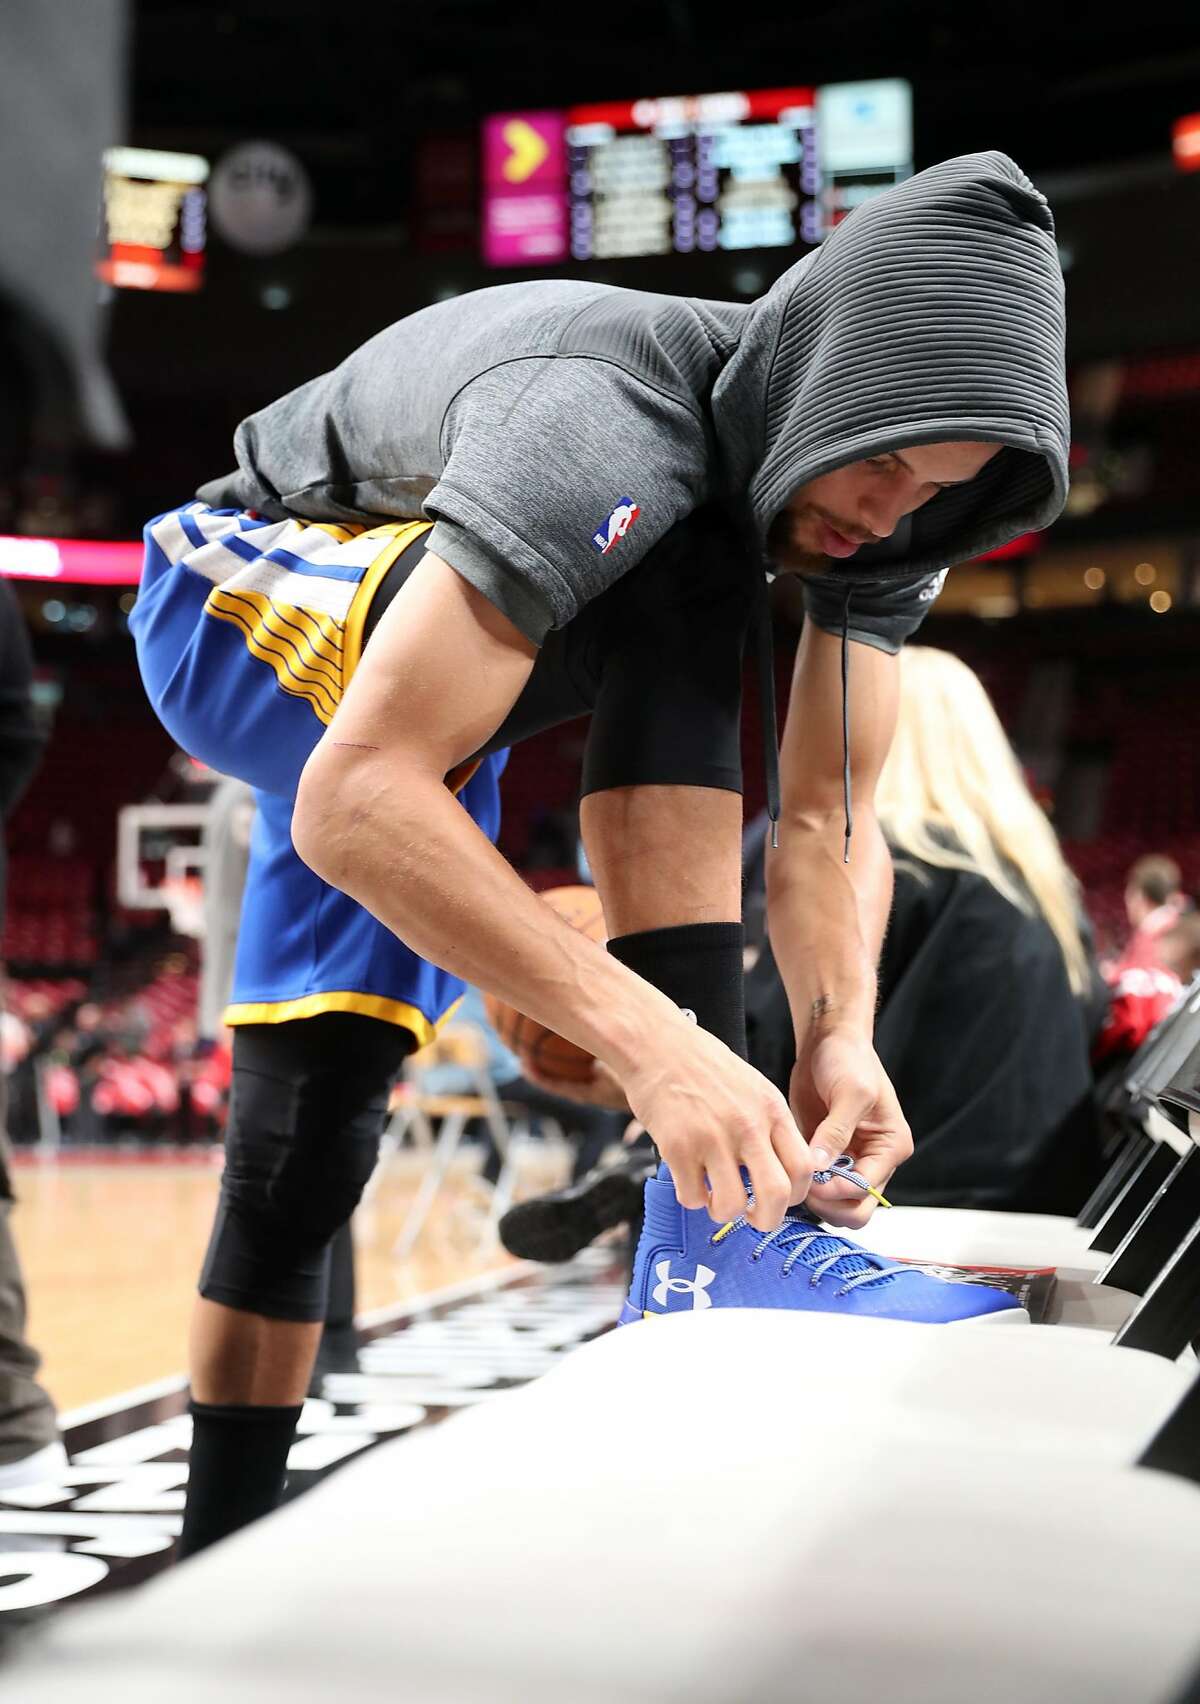 FILE-- Golden State Warriors' Stephen Curry ties his shoe prior to warming up before Warriors play Portland Trail Blazers in Game 3 of NBA Western Conference 1st Round Playoffs at Moda Center in Portland, Oregon on Saturday, April 22, 2017.